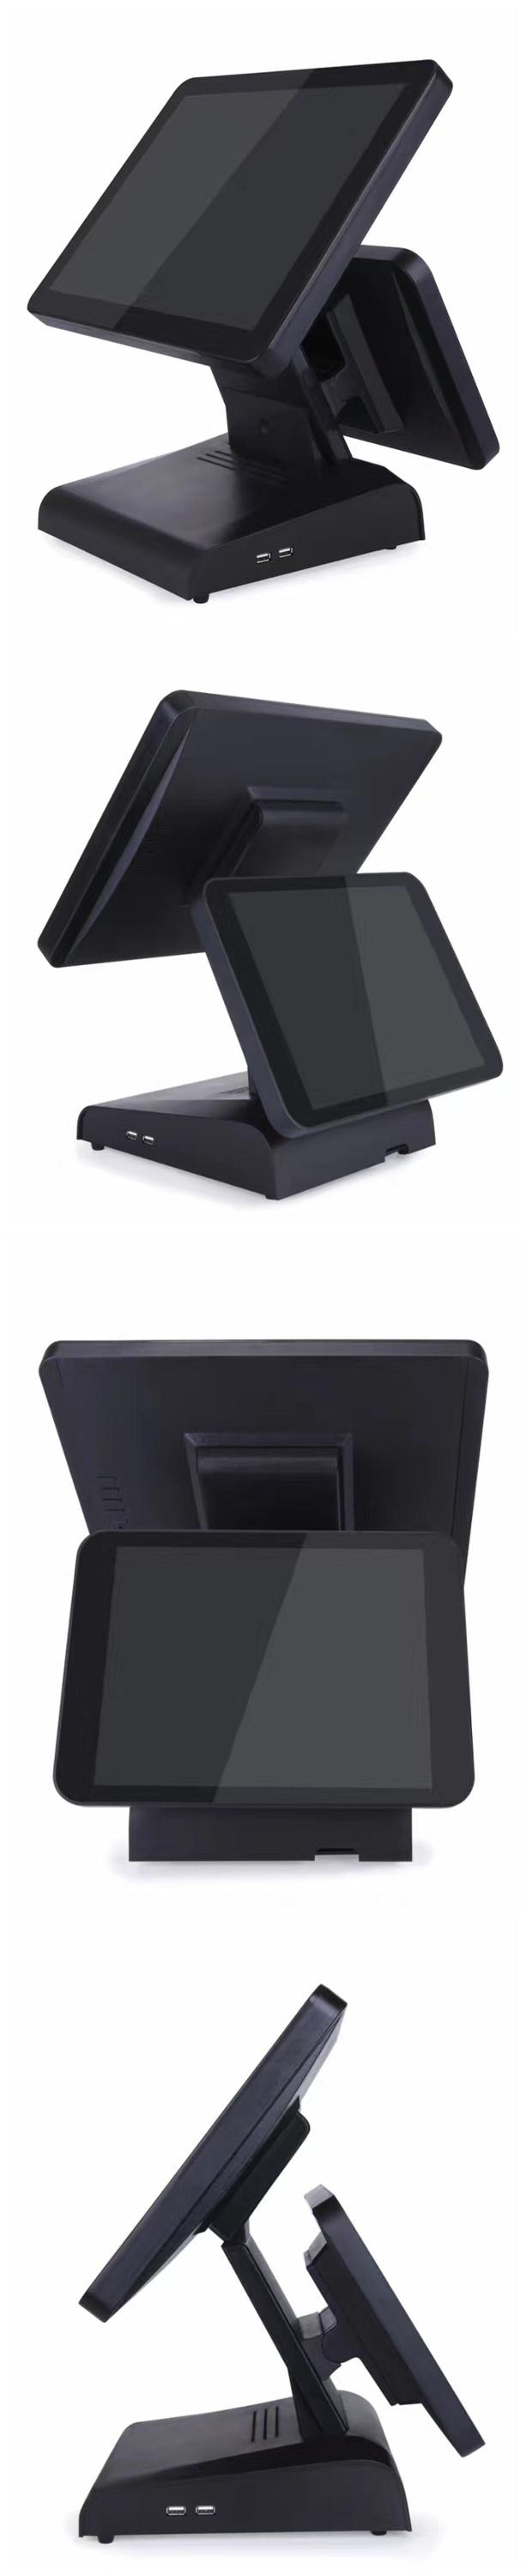 15'' Capacitive Touch Screen POS System 4GB+64GB 12 inch LCD Screen Customer Display POS Terminal